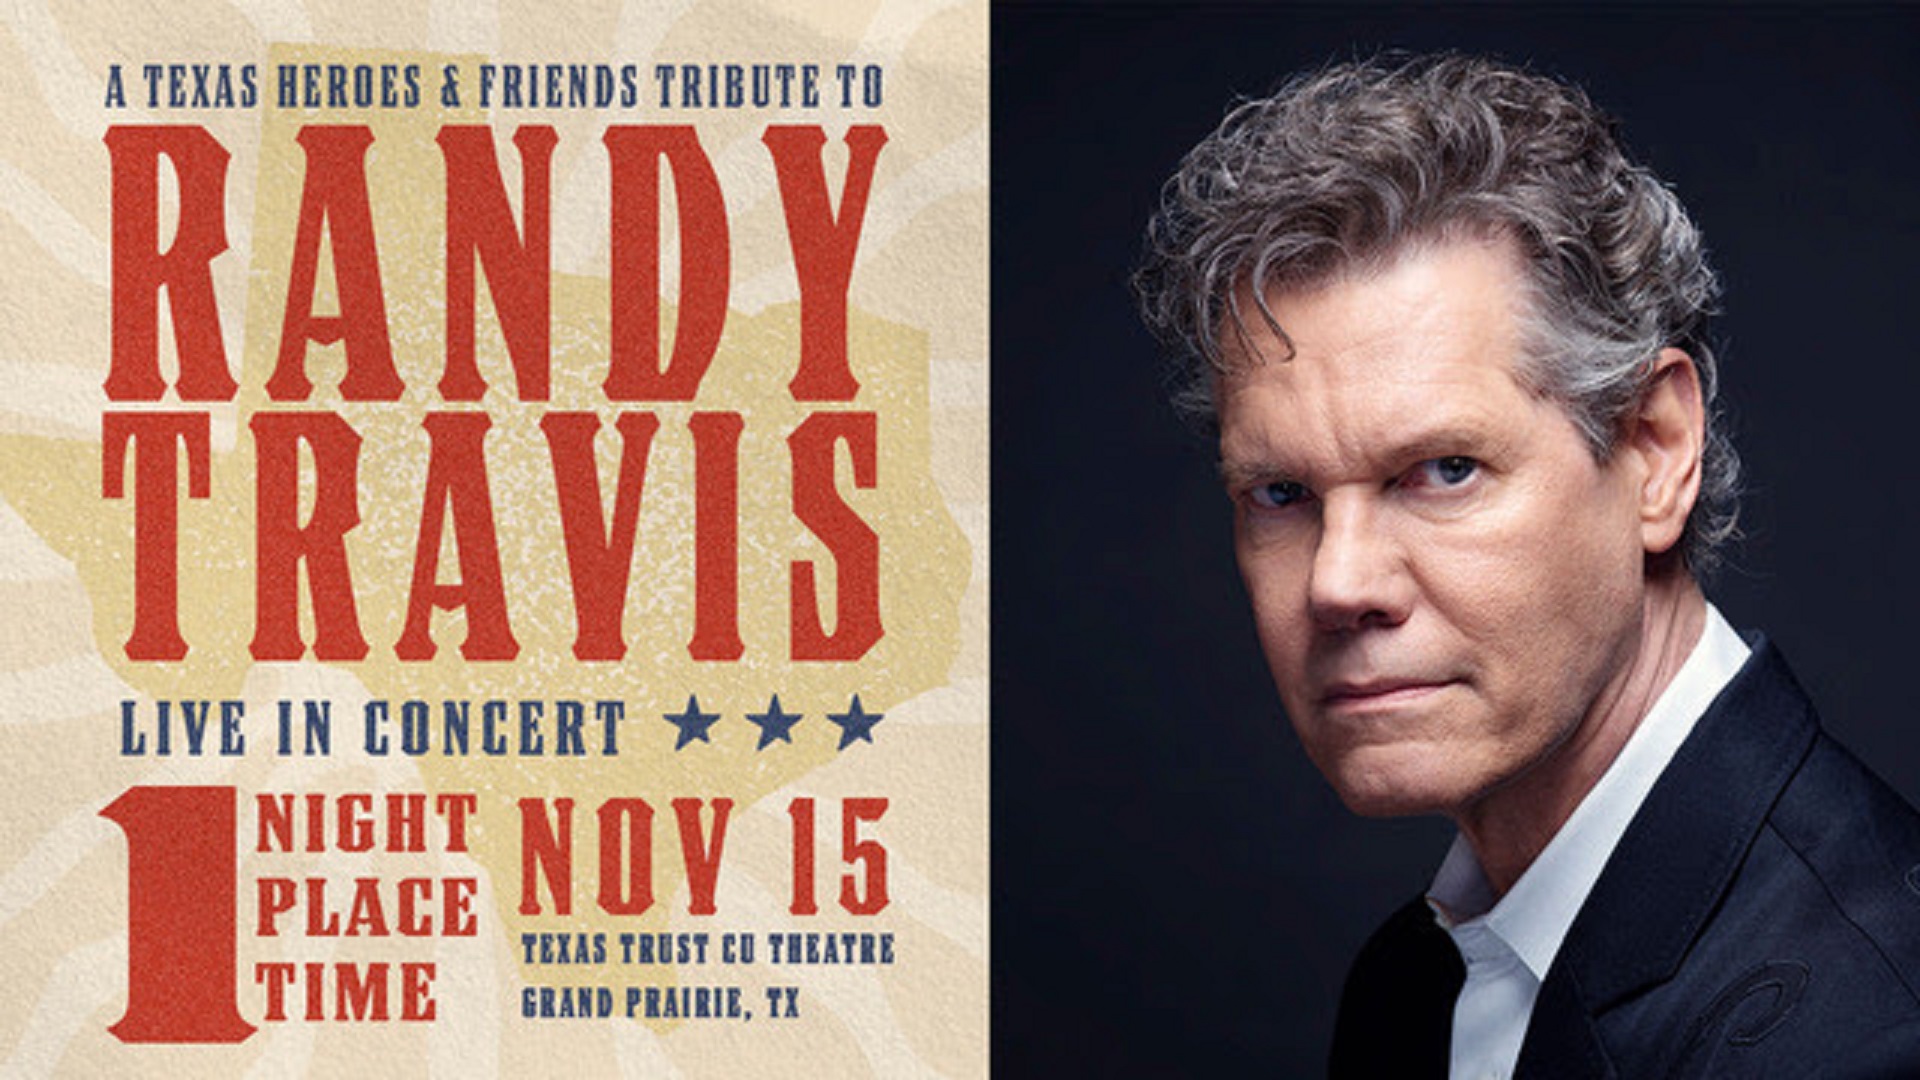 A Texas Heroes & Friends Tribute to Randy Travis Announced for Wednesday, November 15 in Grand Prairie